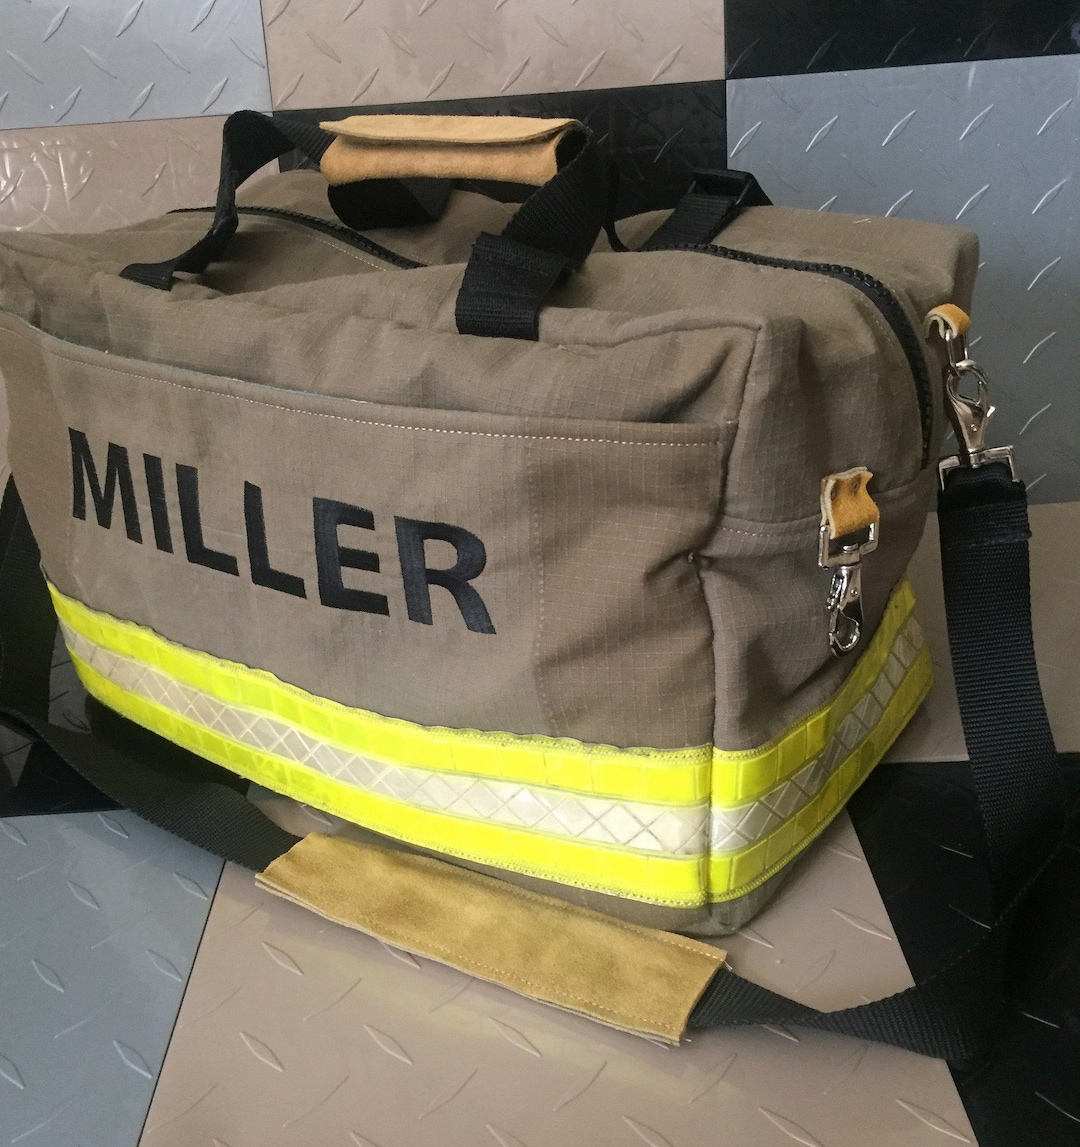 Firefighter Decommissioned Bunker Gear Duffle Bag Large Turnout Gear ...